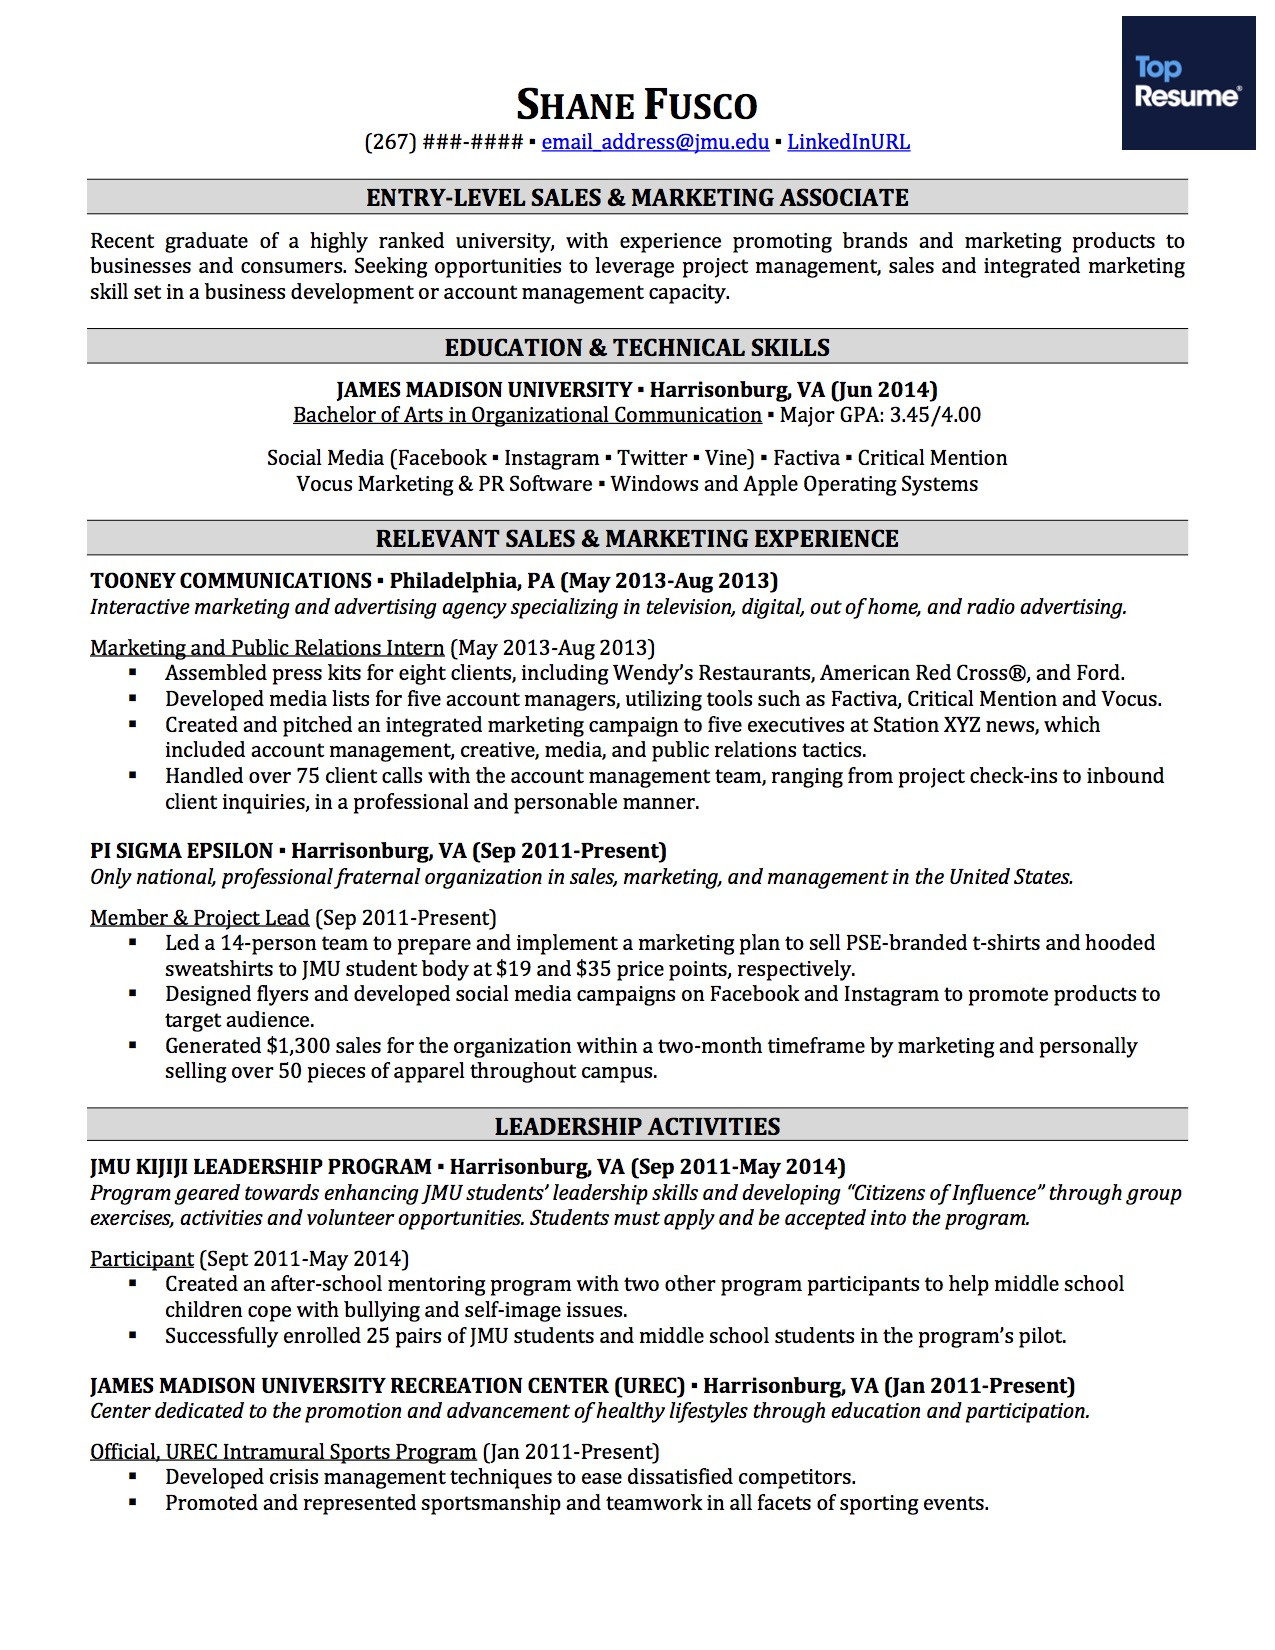 Sample Functional Resume No Work Experience How to Make A Great Resume with No Experience topresume